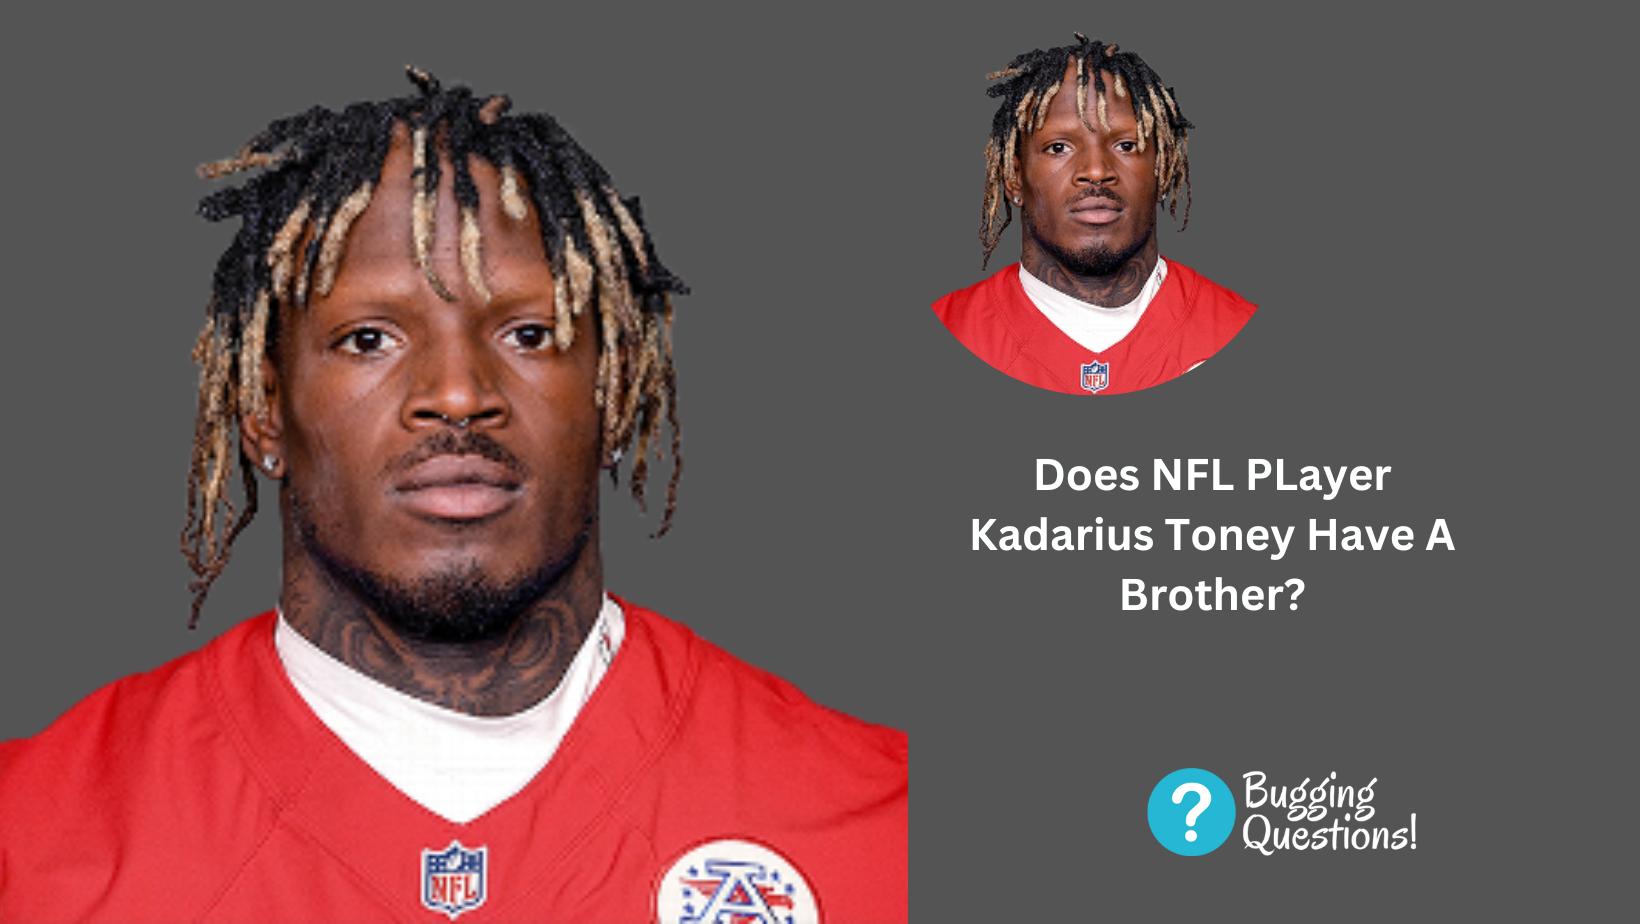 Does NFL PLayer Kadarius Toney Have A Brother?